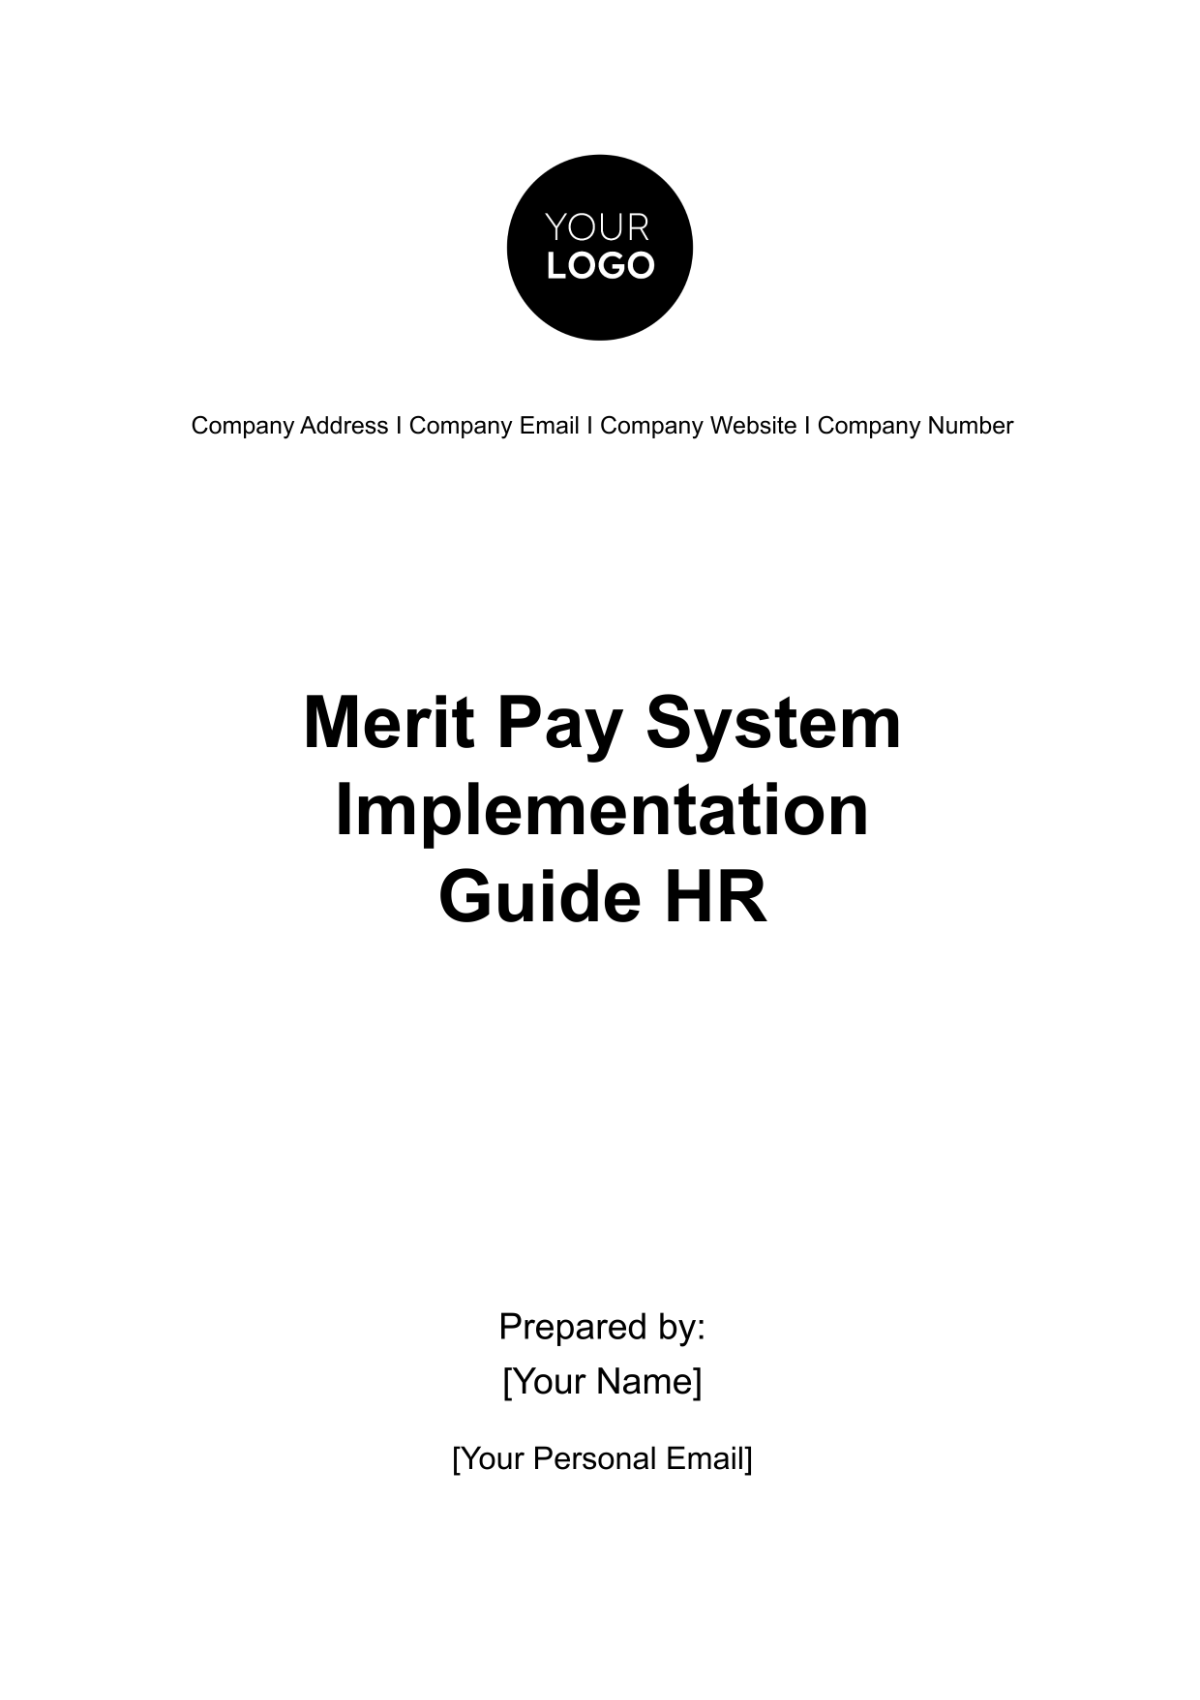 Free Merit Pay System Implementation Guide HR Template